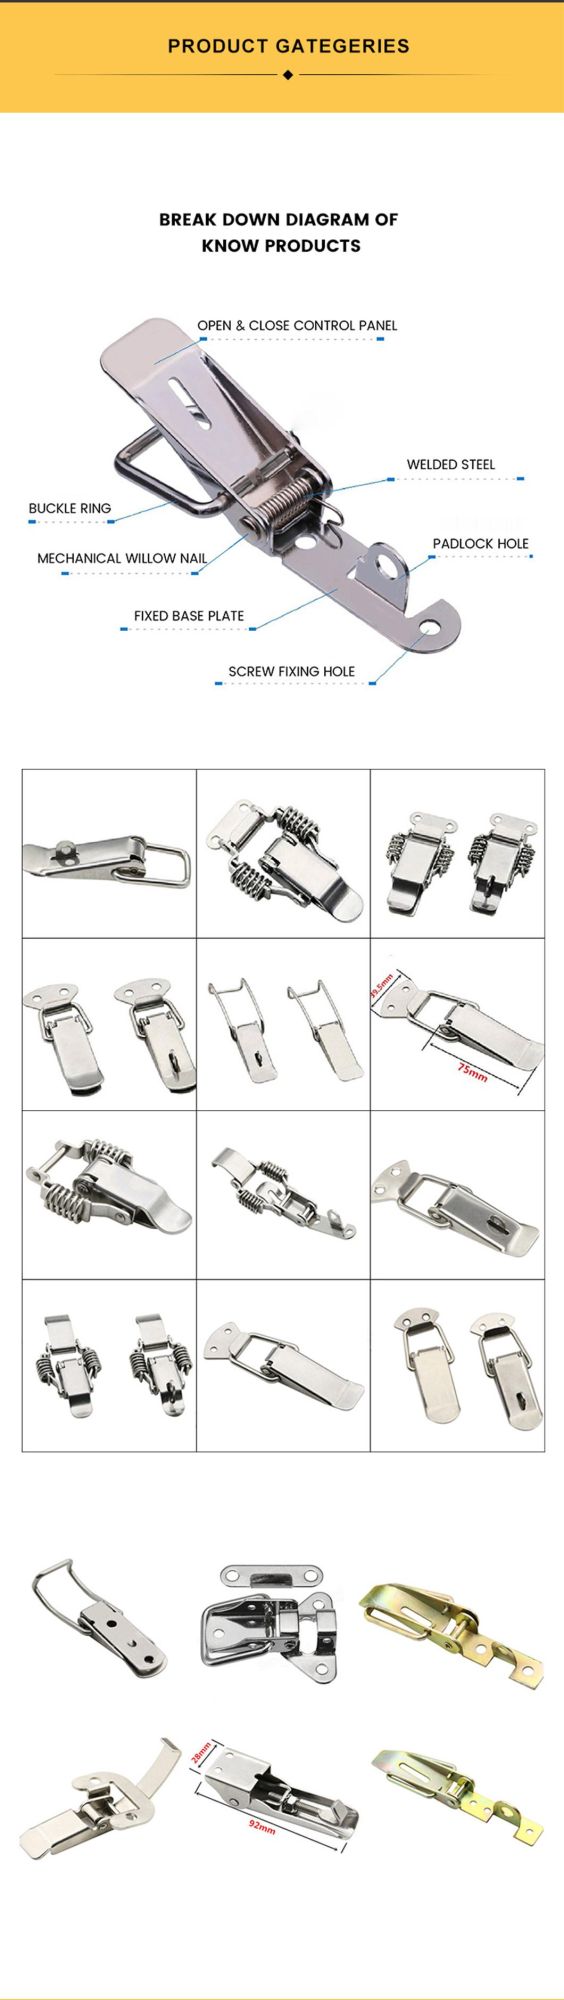 Stainless Steel Adjustable Locking Toggle Latch Catch Plate Toggle Latches for Securing Metal Sheets Project